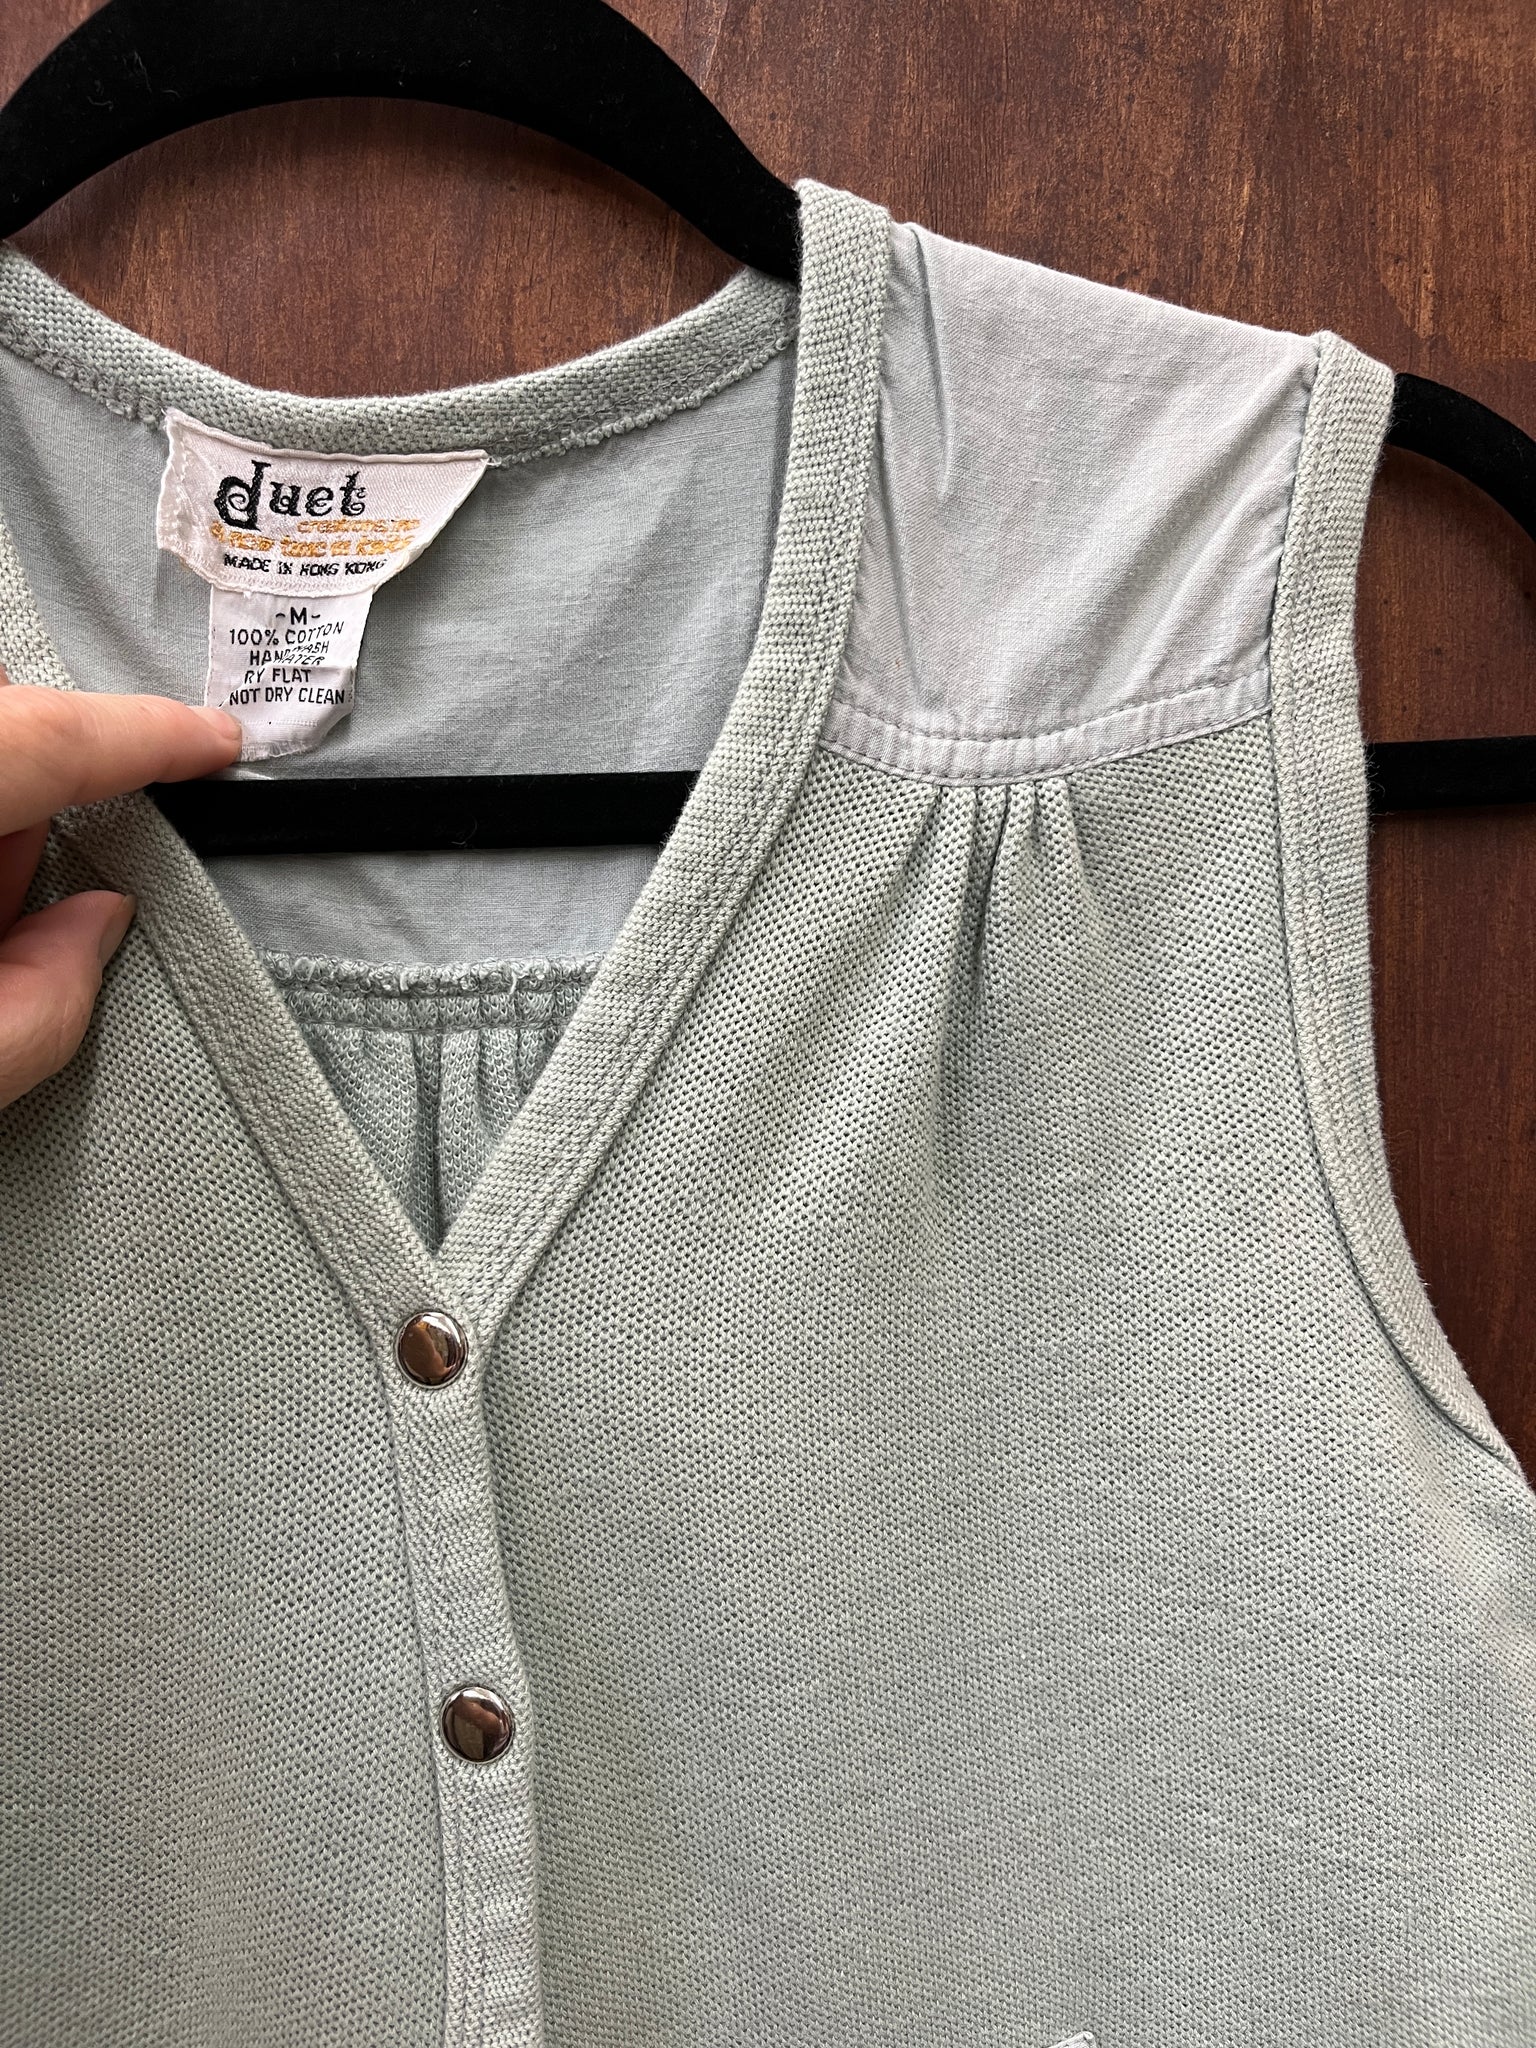 1990s TOP-VEST- Duet- sage green cropped snap buttons